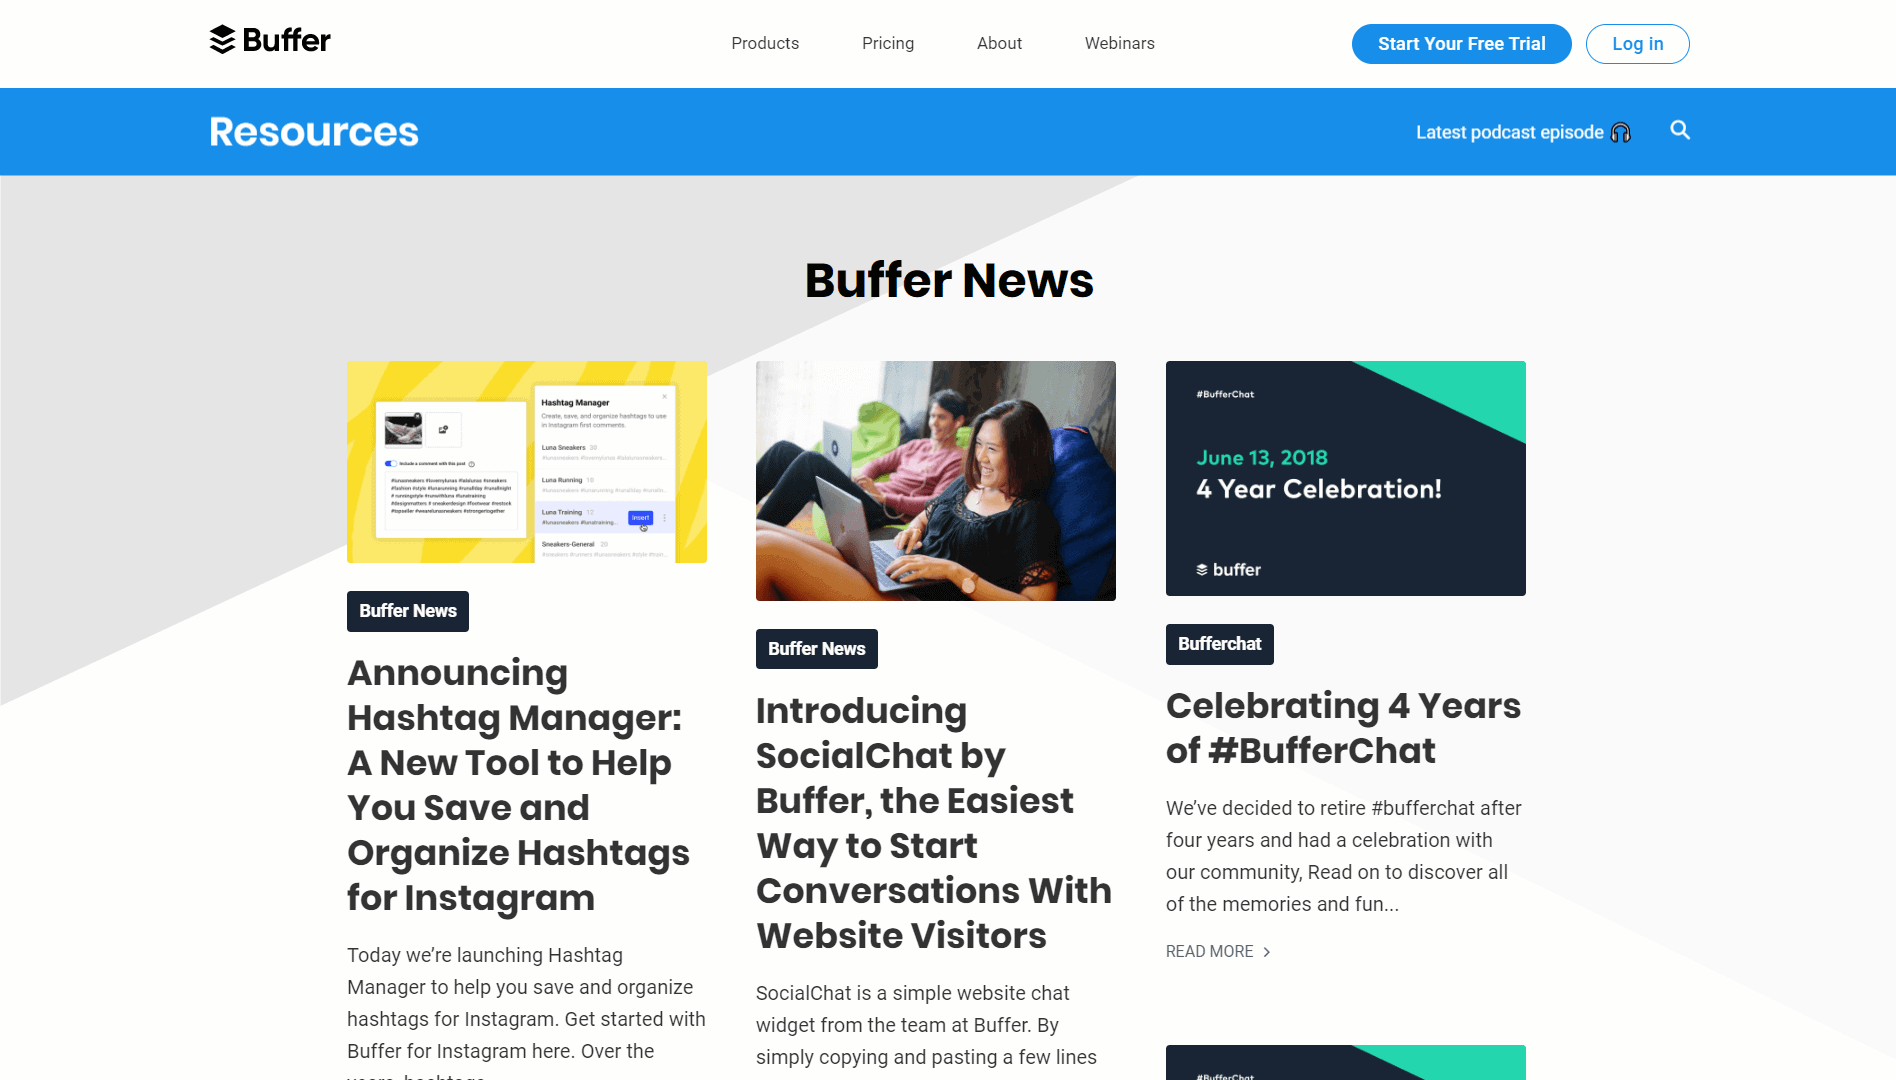 Buffer resources